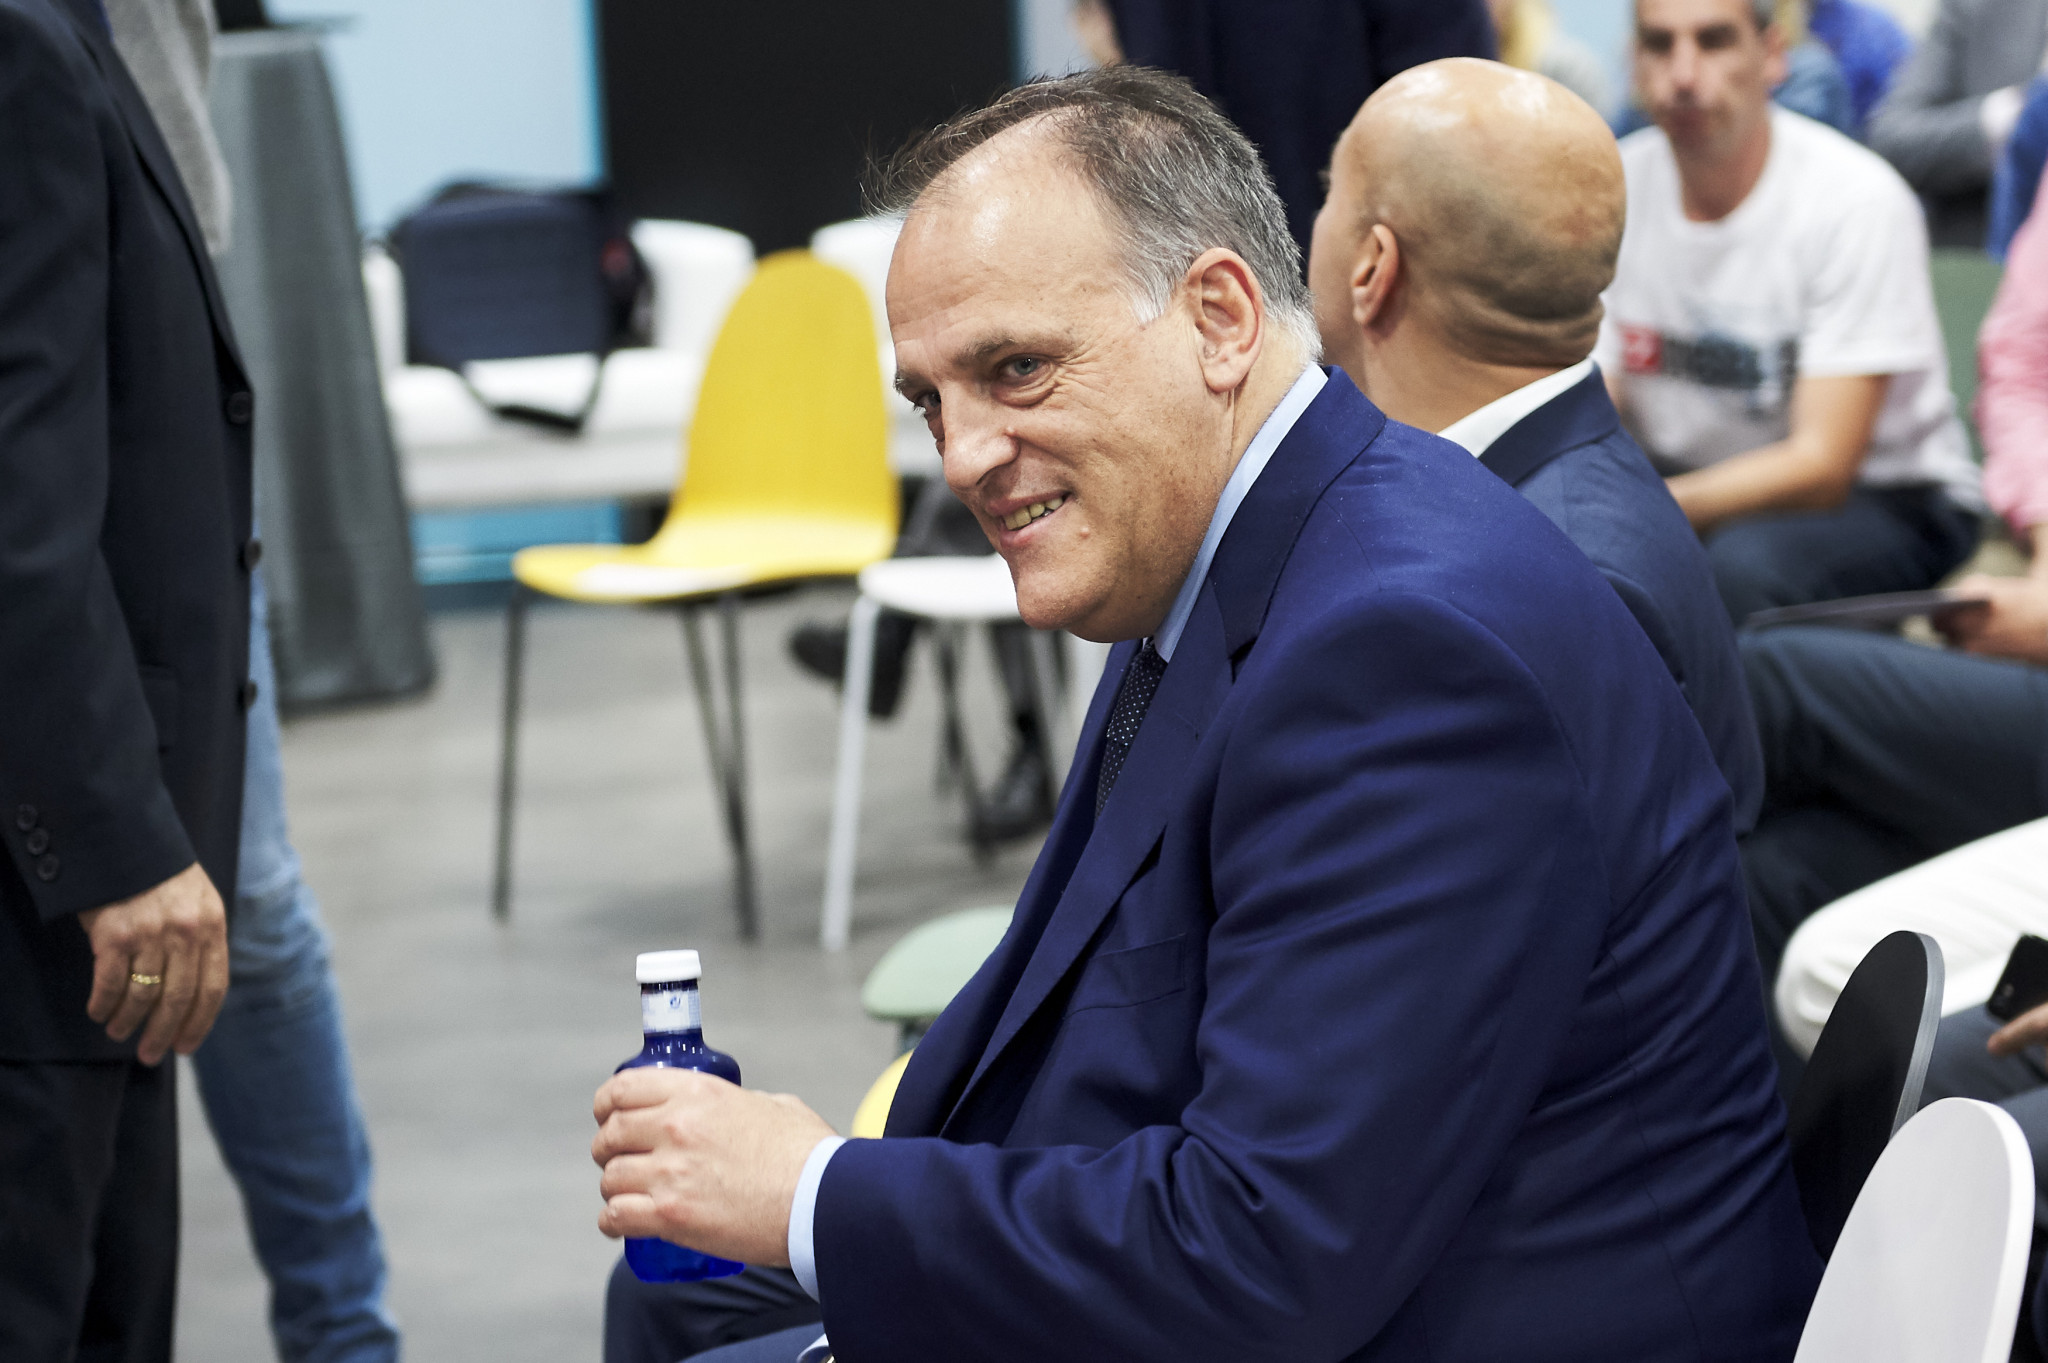 La Liga President Javier Tebas does not understand the opposition to a game in Spain's top division being played in the United States ©Getty Images